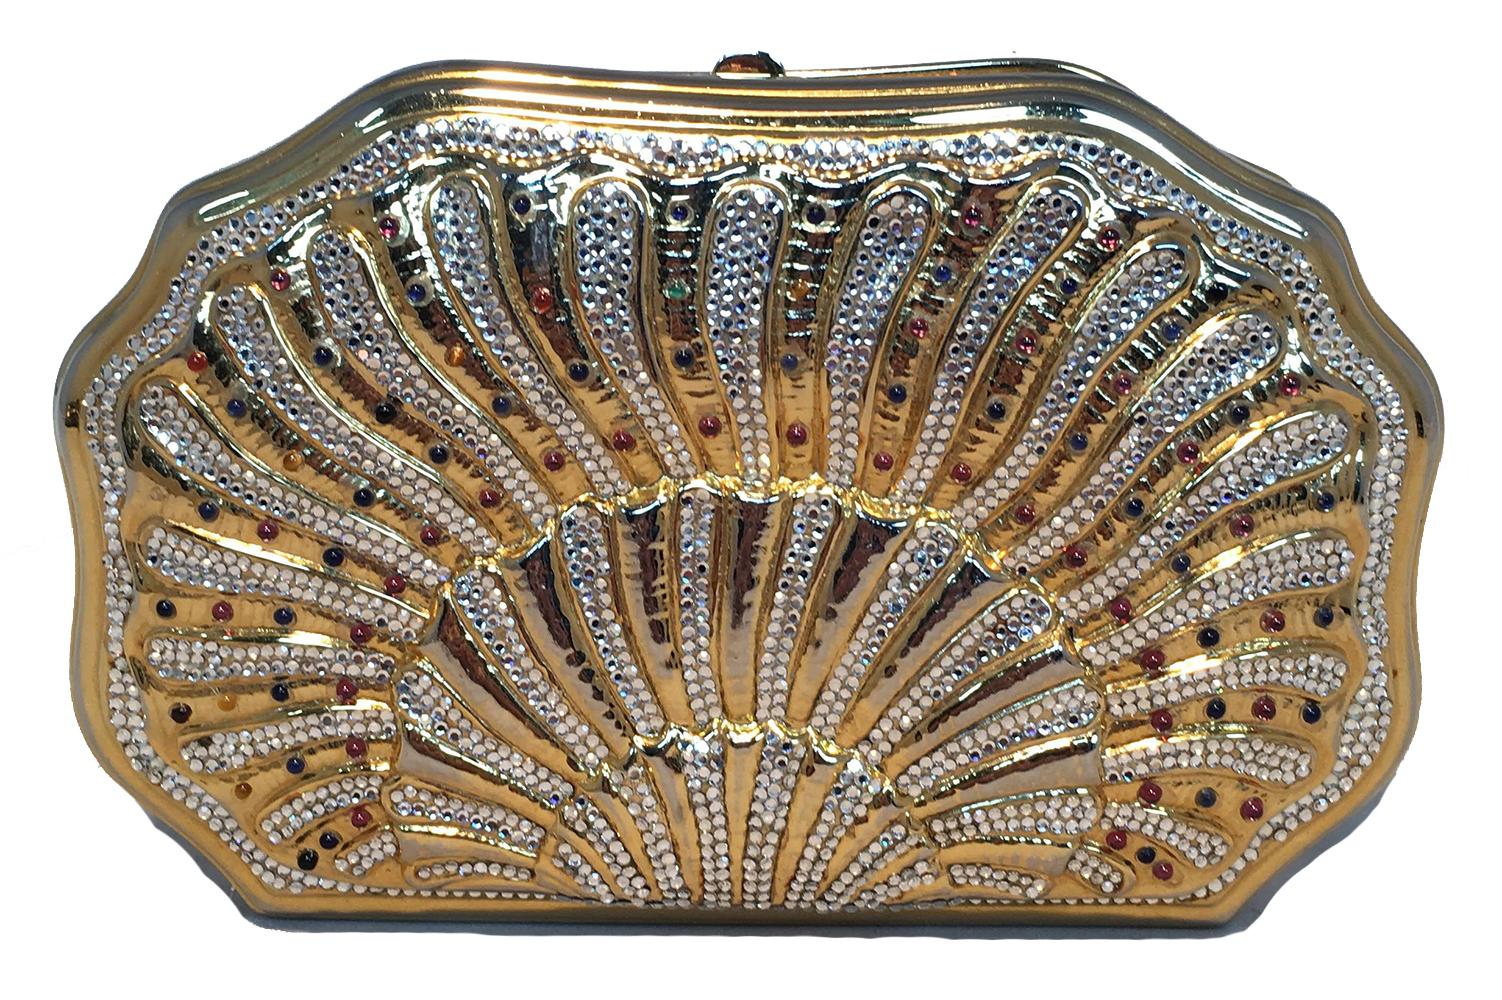 Judith Leiber Swarovski Crystal Gemstone Shell Minaudiere Evening Bag in excellent vintage condition. Gold shell shape with clear swarovski crystals and tiny multicolor gemstone details. Top button closure opens to a gold leather interior that holds